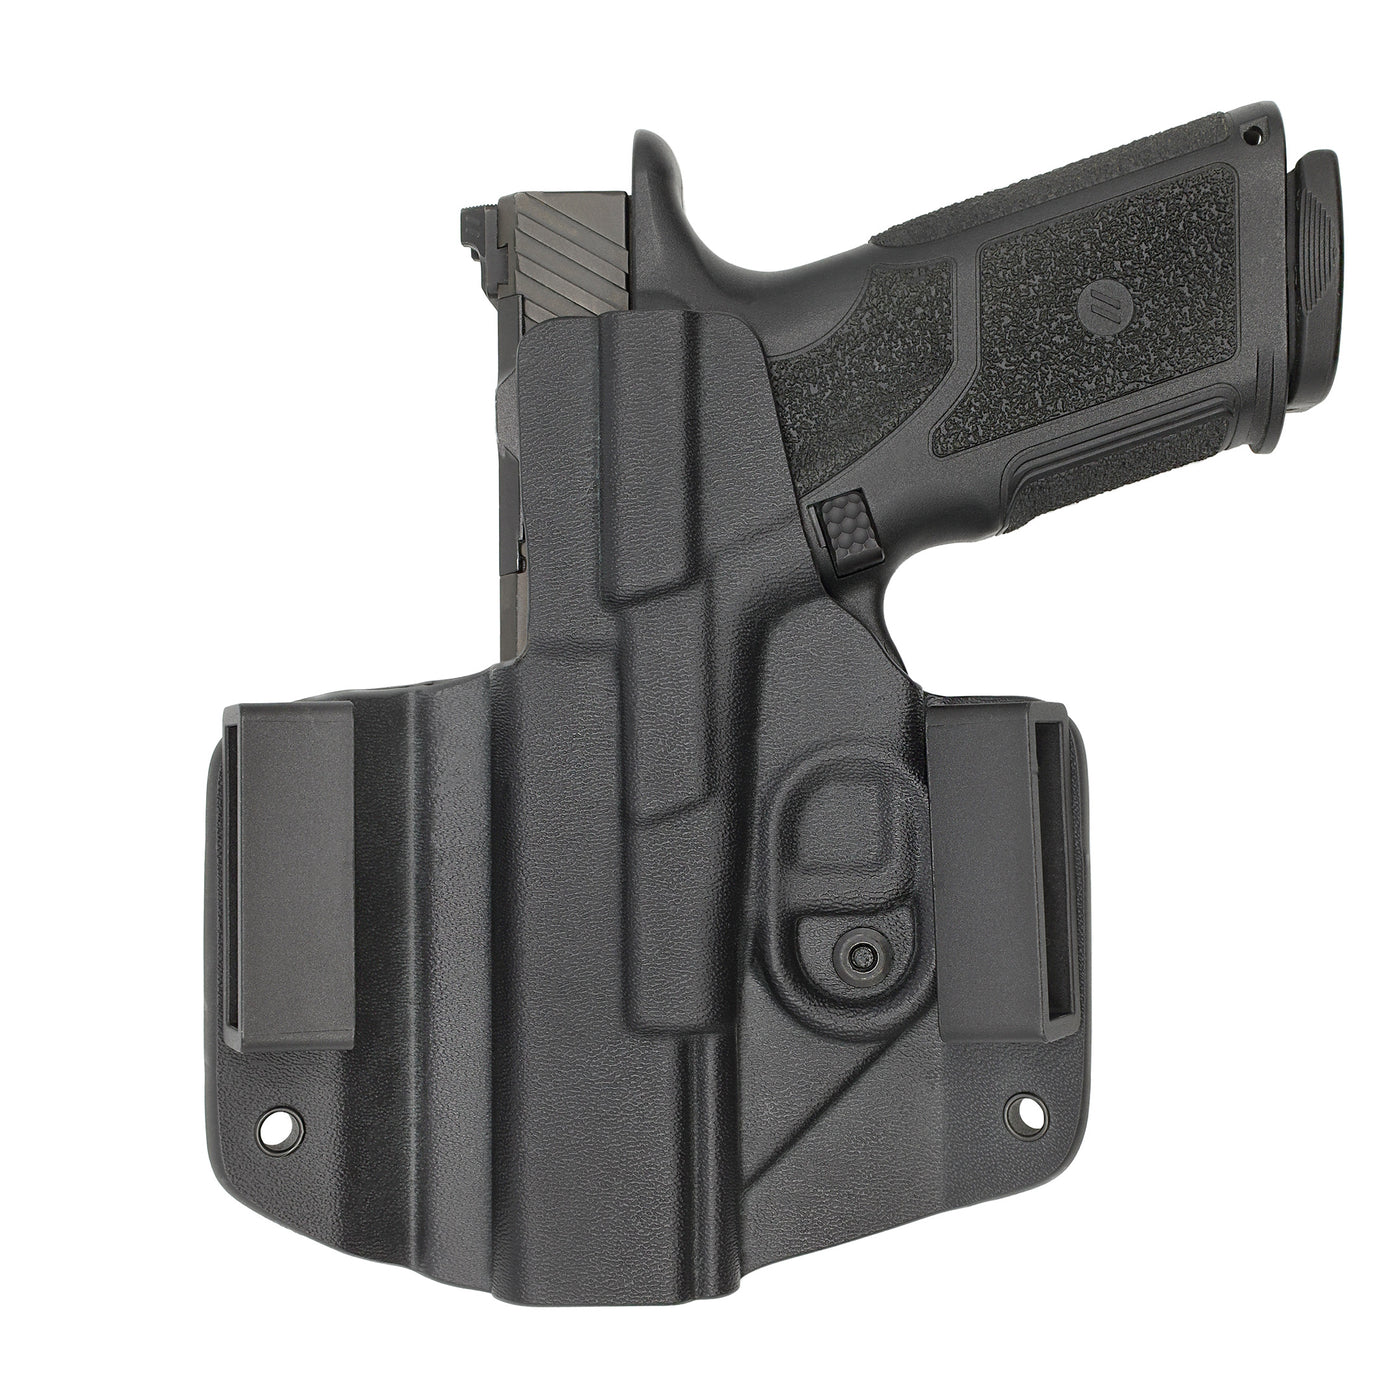 C&G Holsters Quickship OWB Covert ZEV OZ9c in holstered position back view